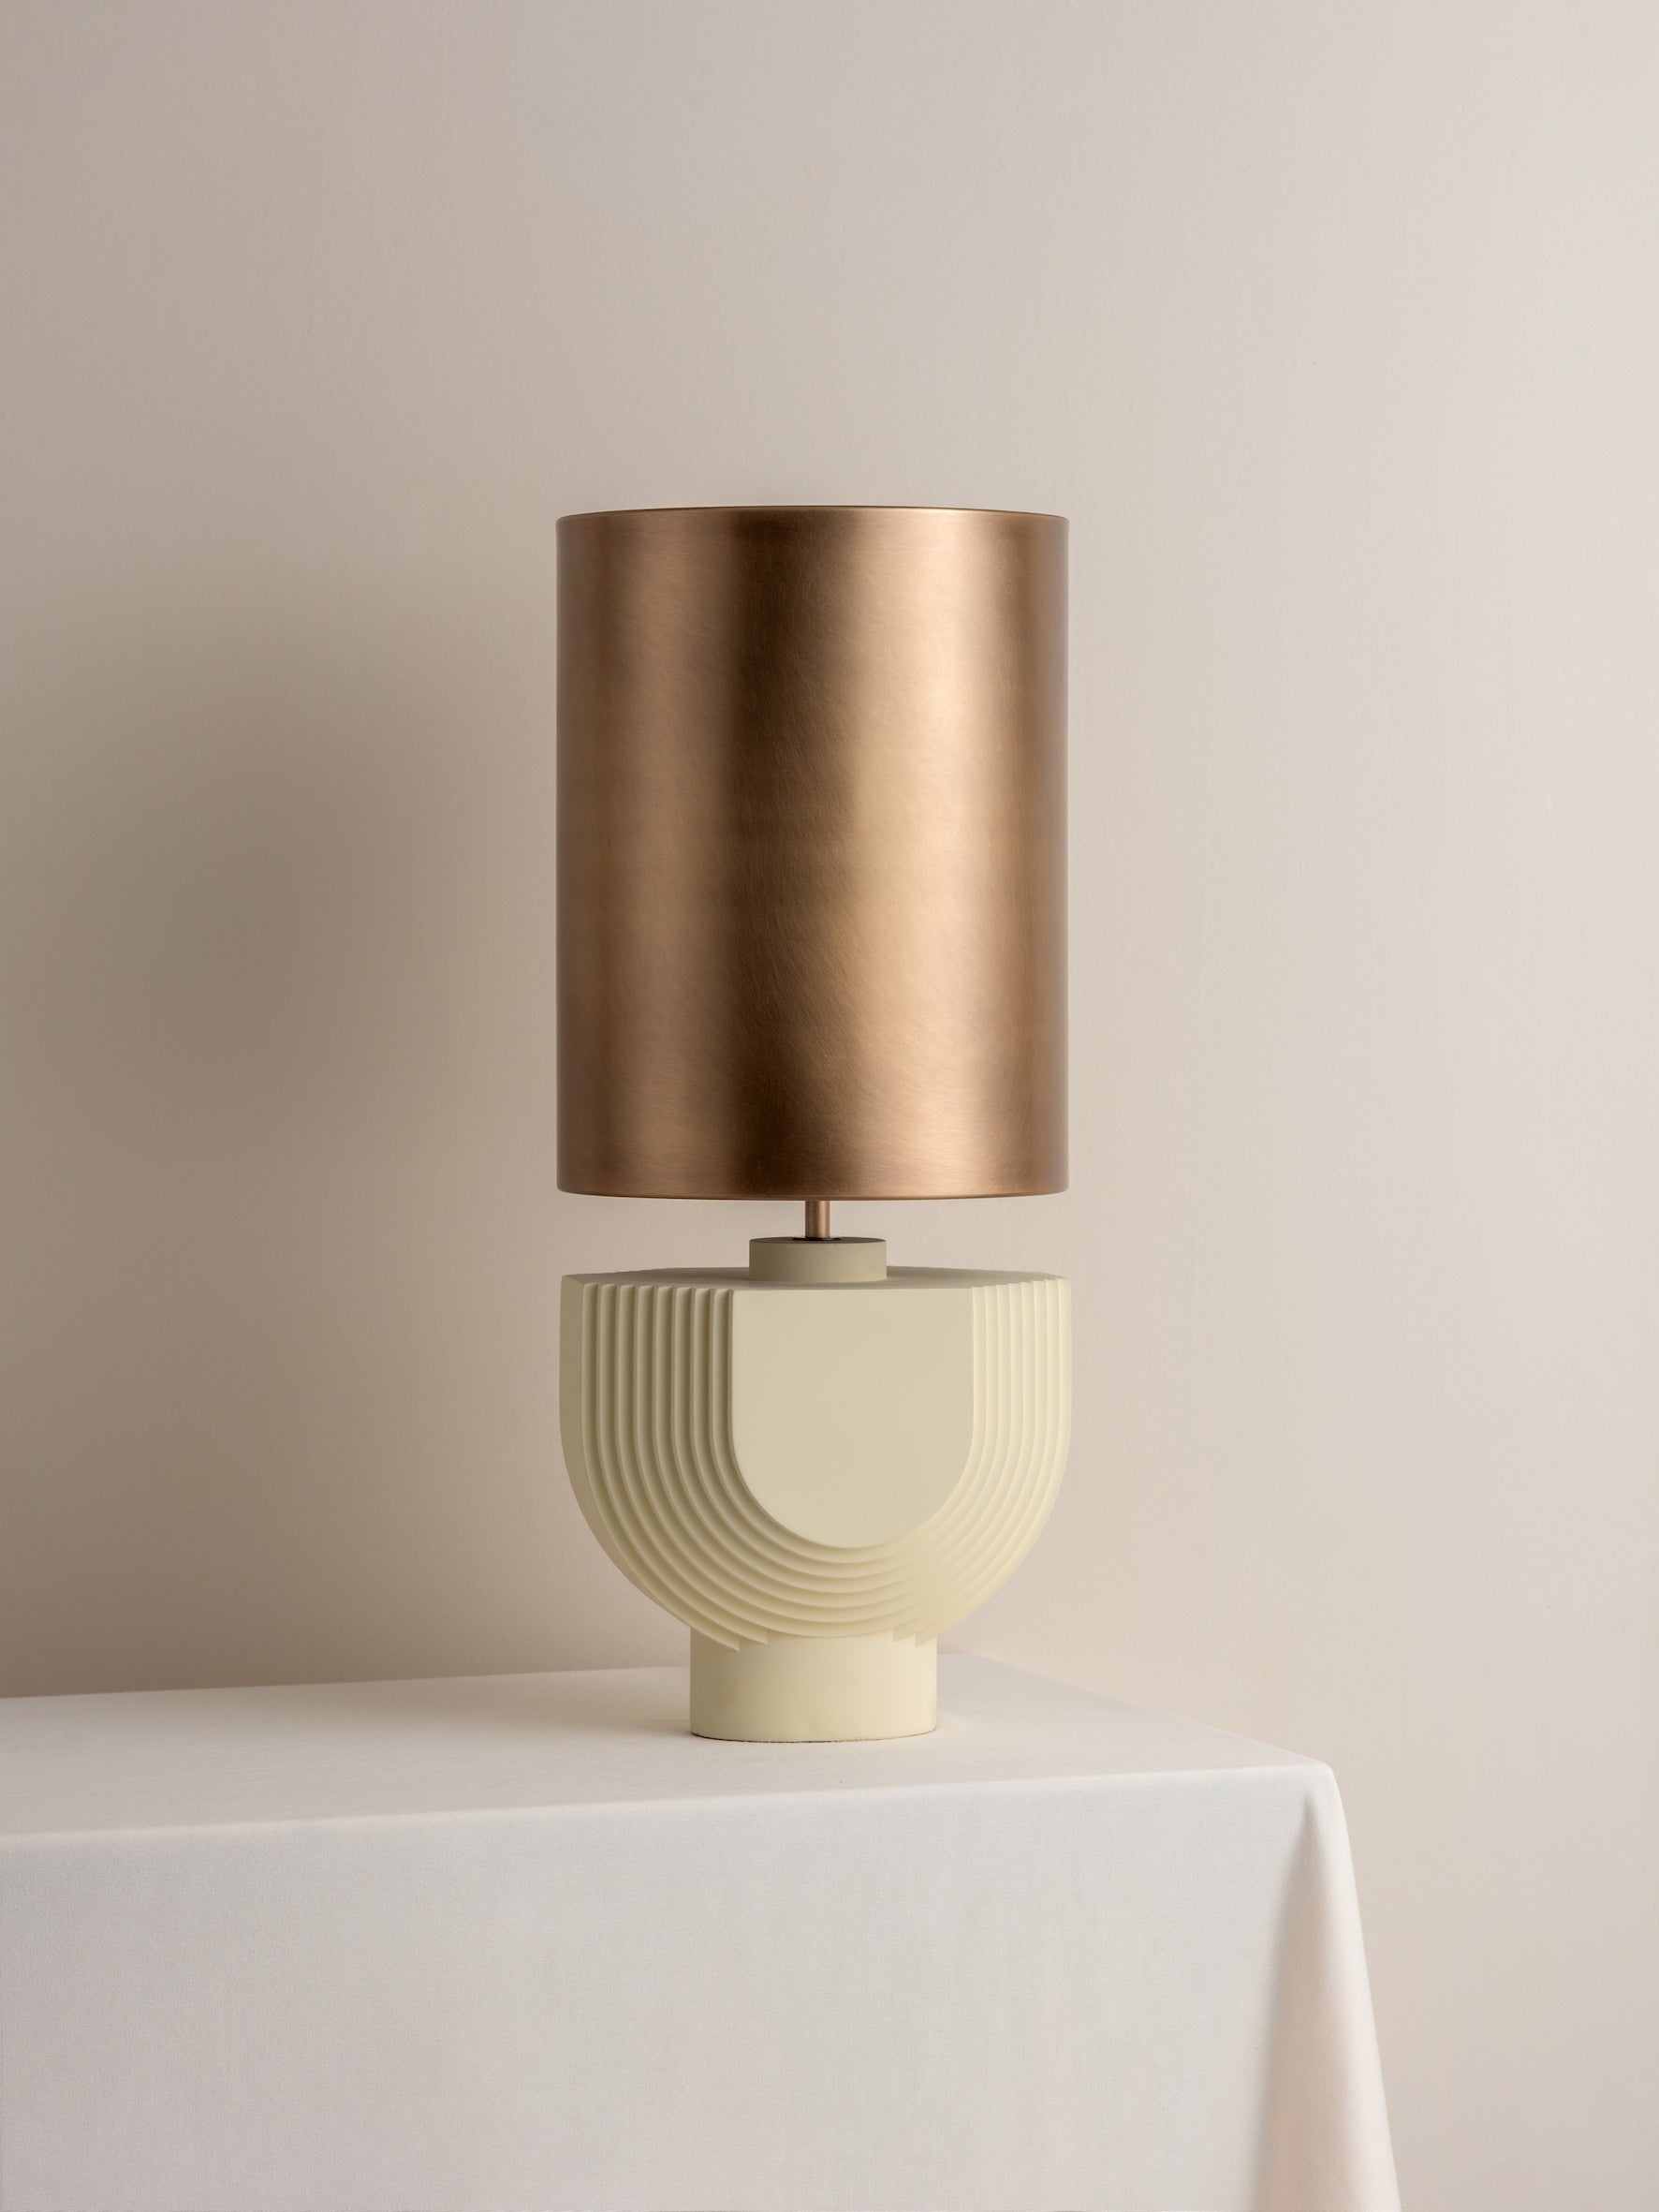 Editions concrete lamp with + aged brass shade | Table Lamp | Lights & Lamps | UK | Modern Affordable Designer Lighting